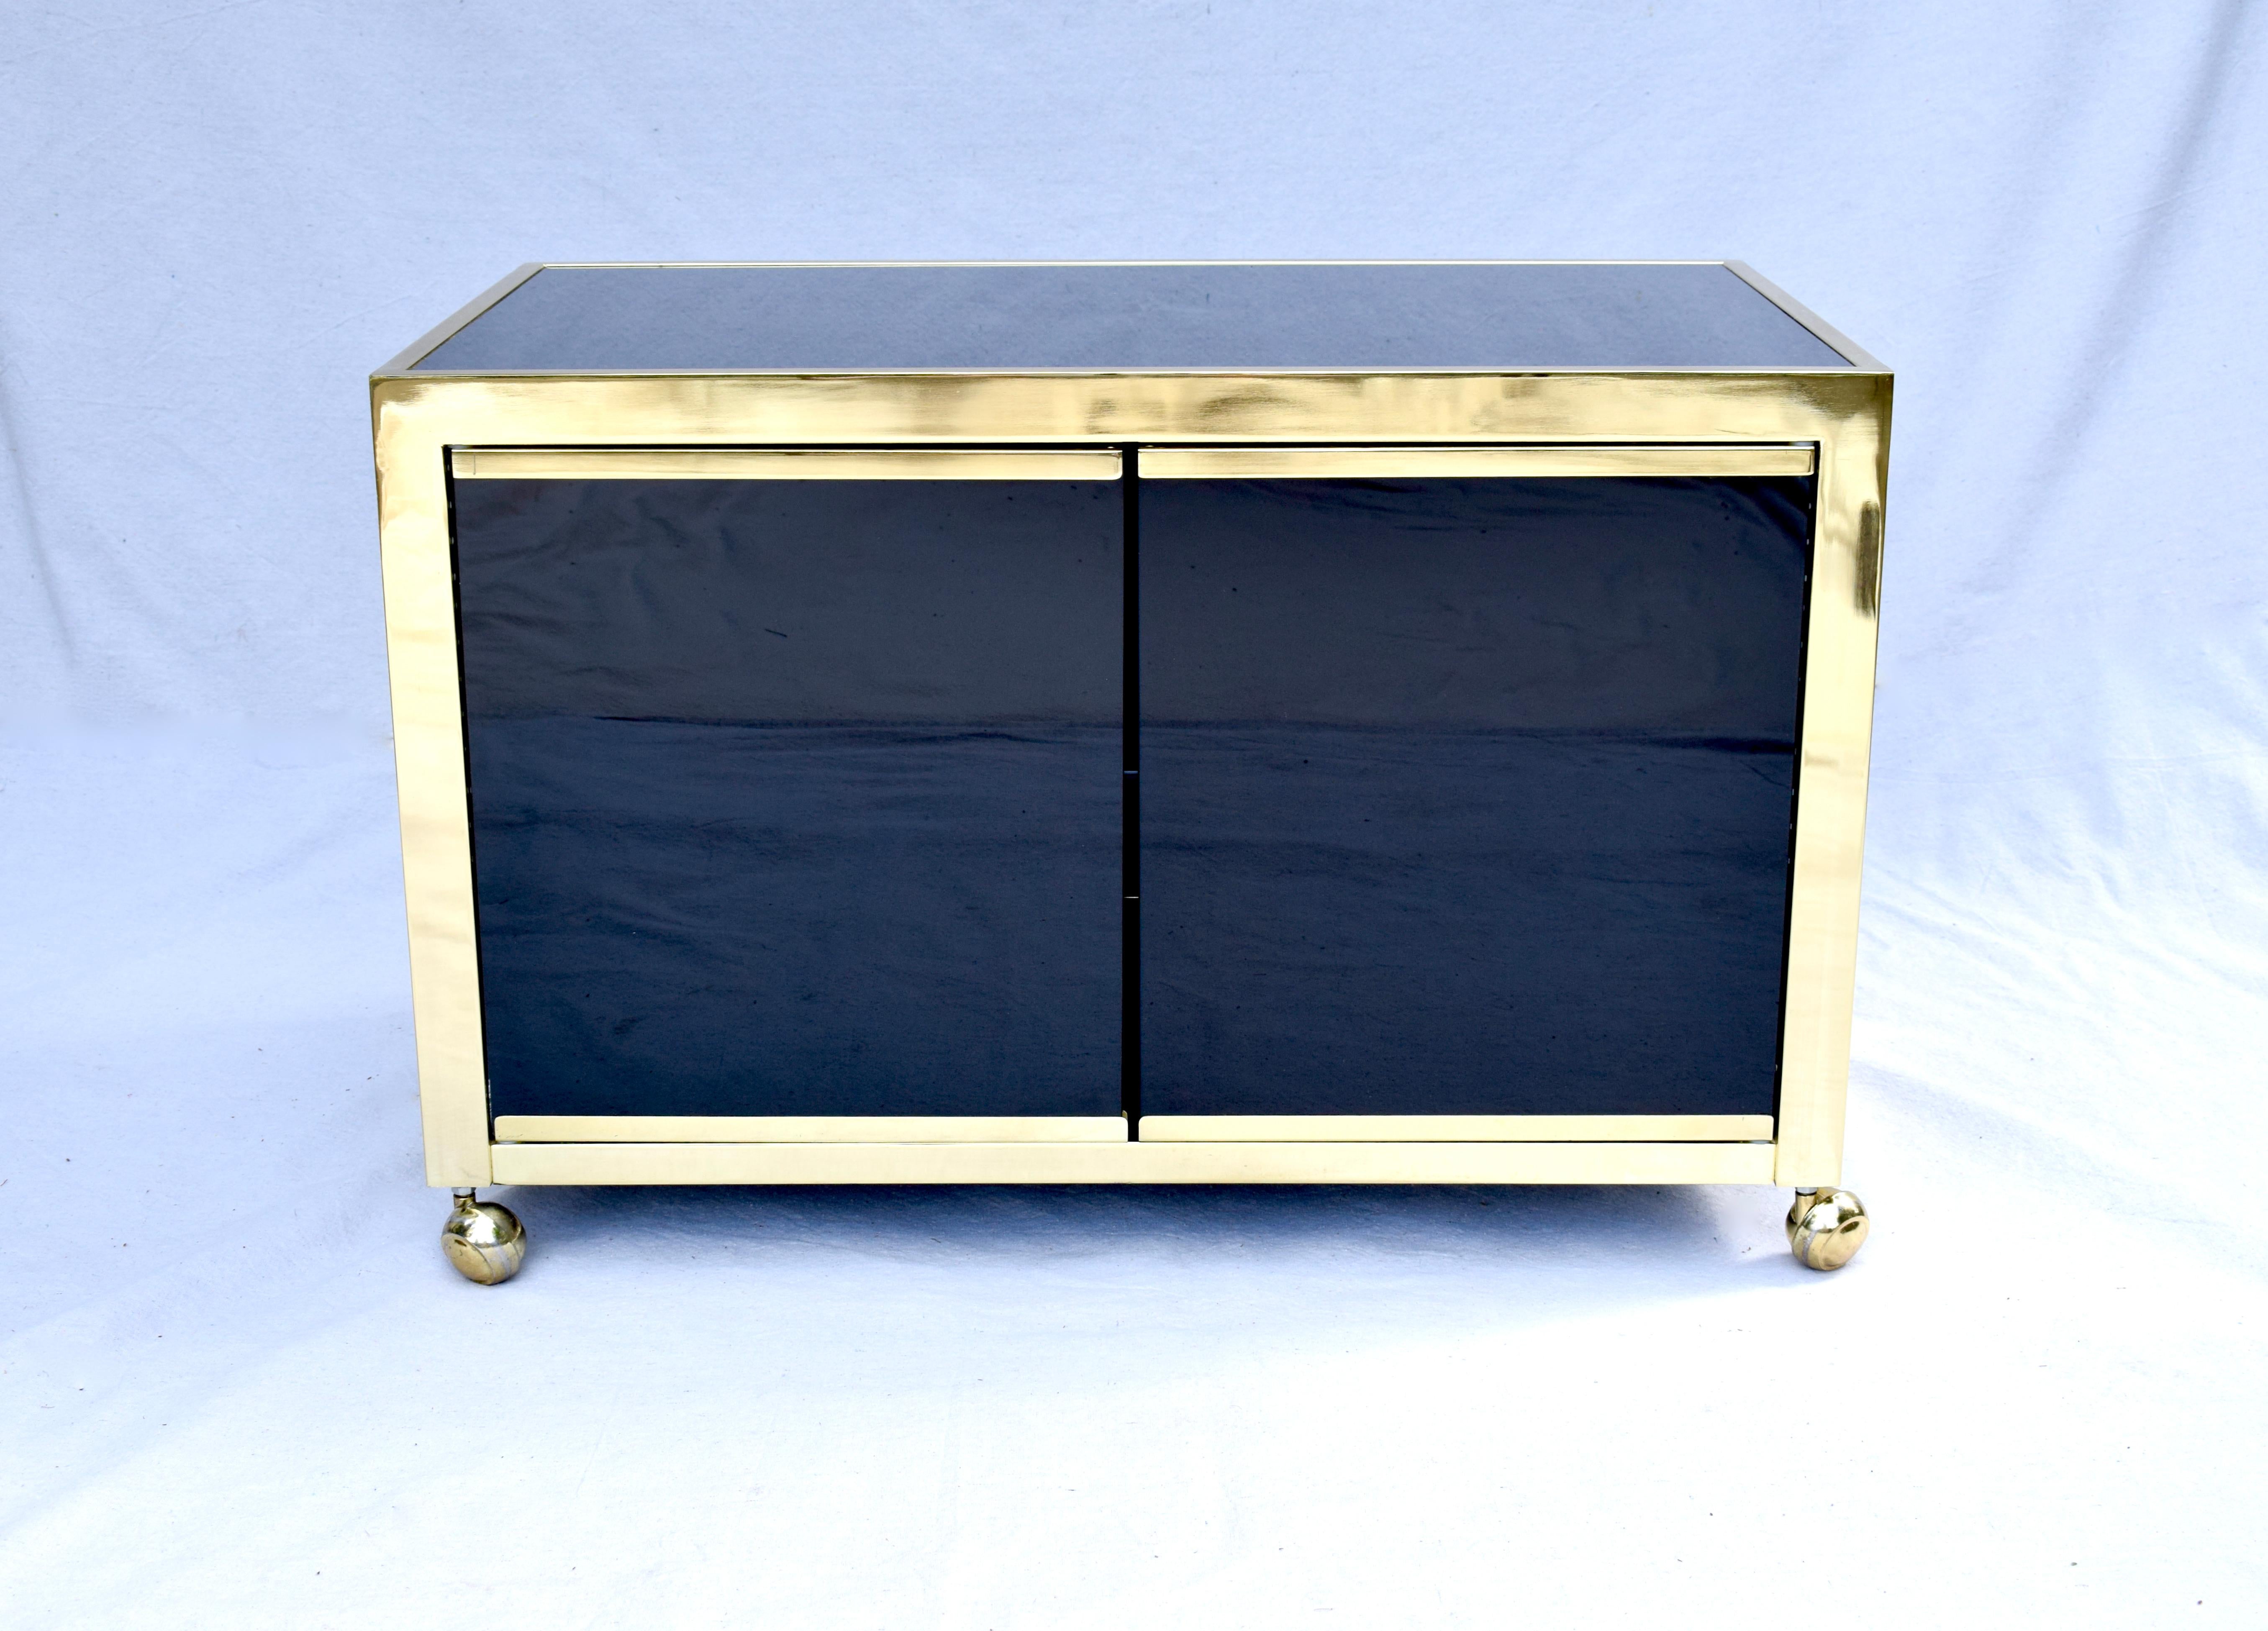 Postmodern Milo Baughman for Design Institute of America black Glass & Brass Cabinet on brass casters. Top, center & base glass shelf & surfaces can be disassembled & wrapped for safe transport. Marvelous multifunctional cabinetry scarcely seen.